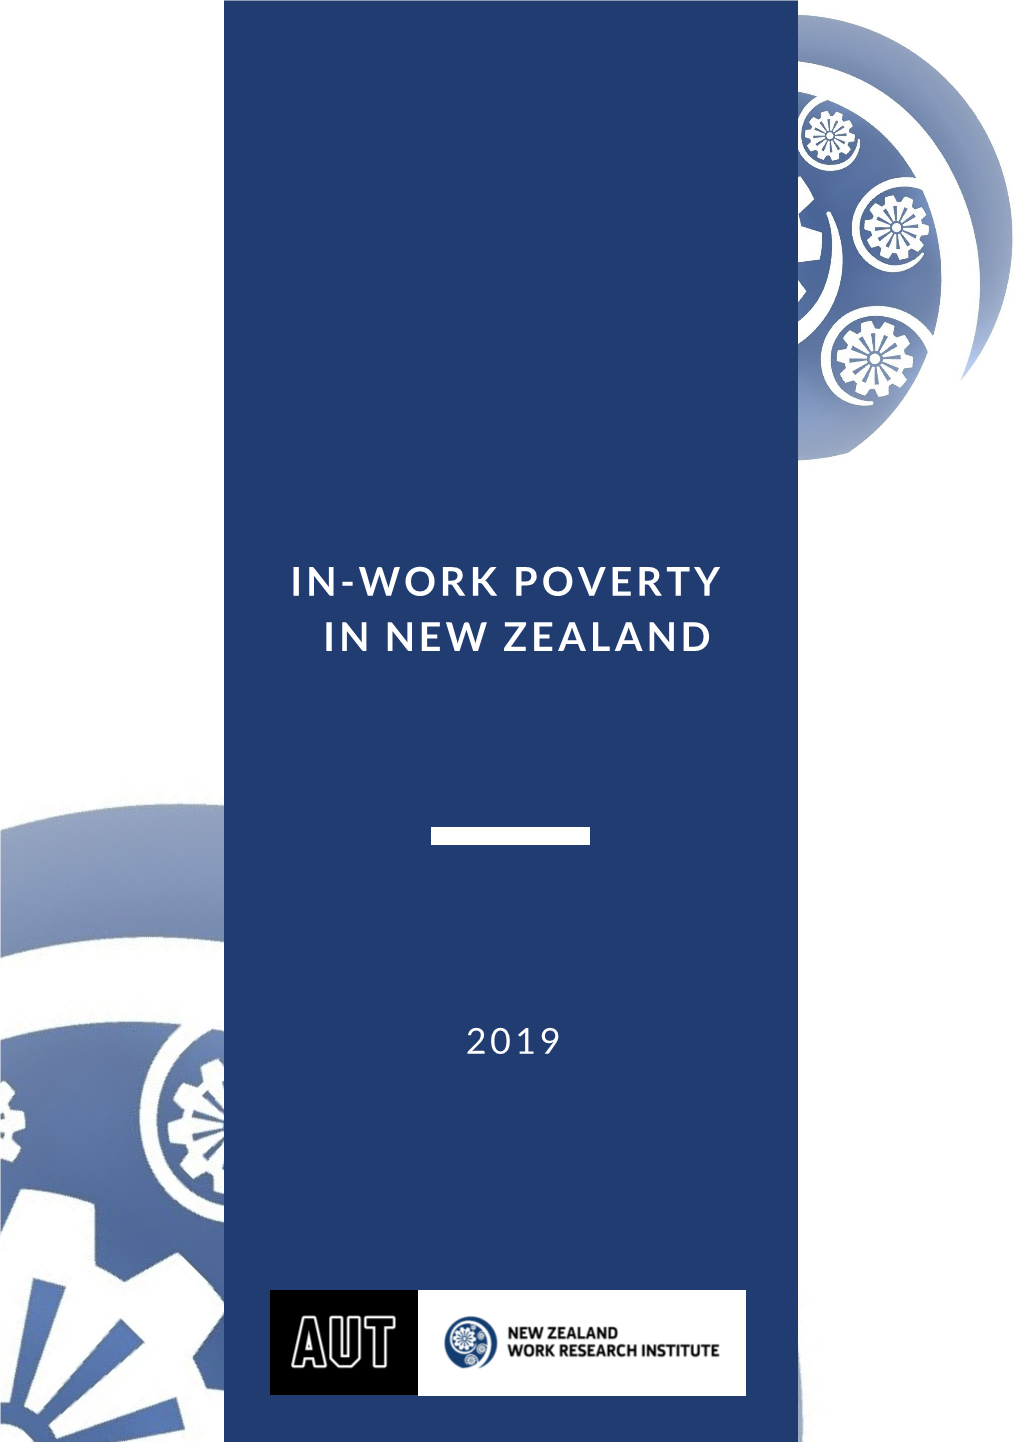 In-Work Poverty in New Zealand